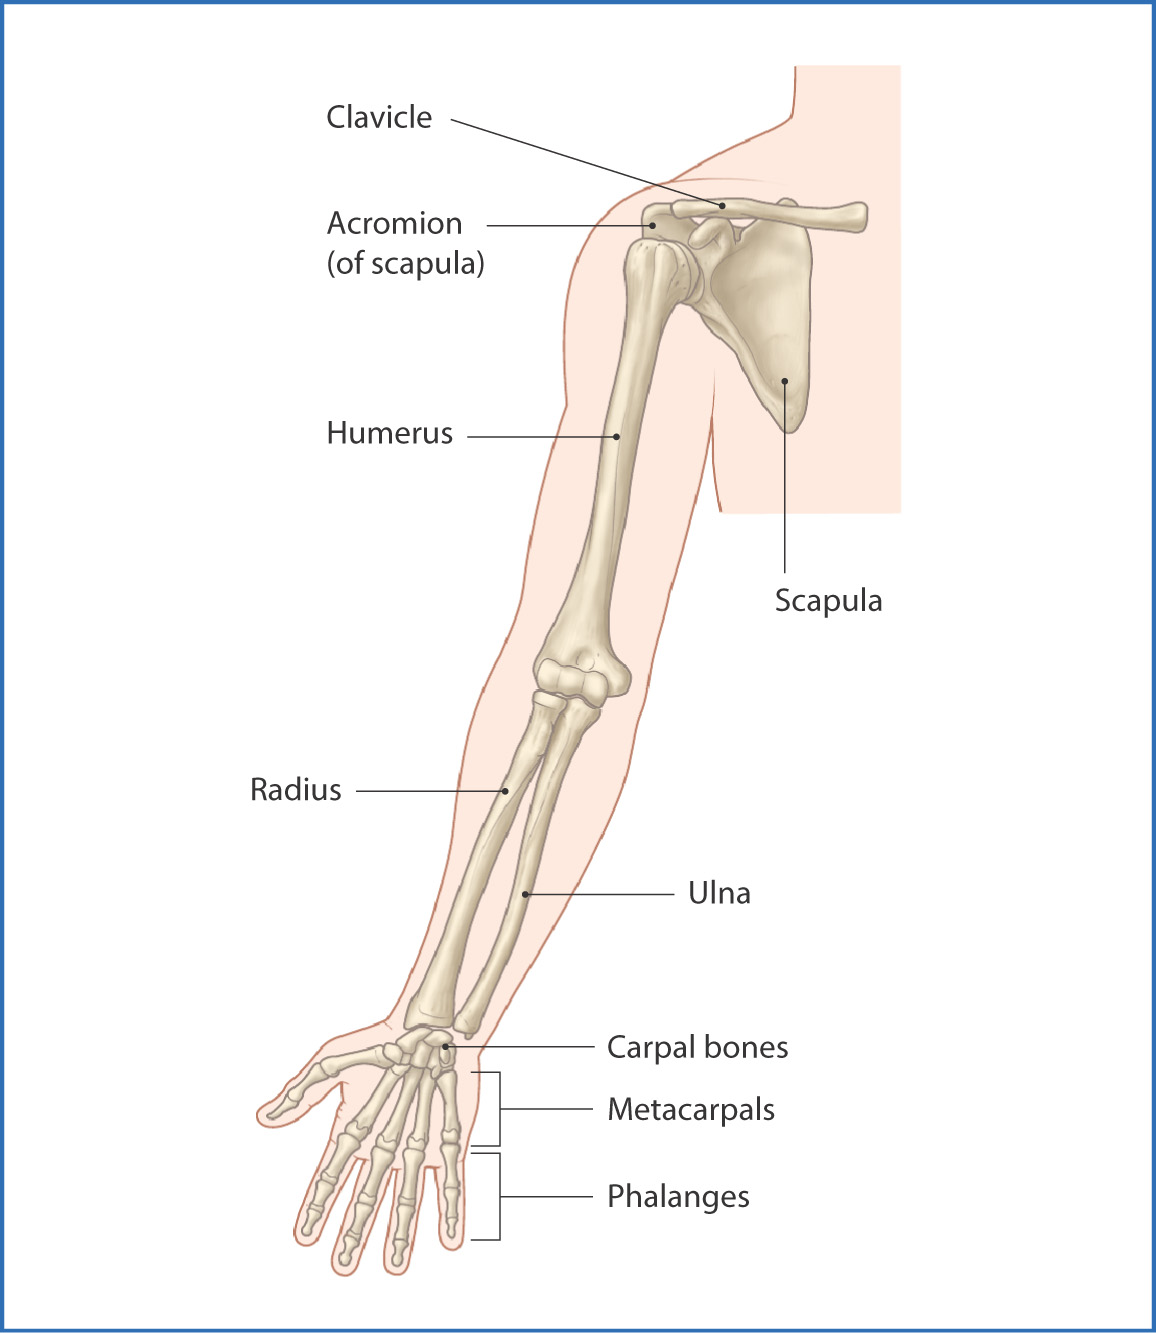 Introduction to the Upper Limb